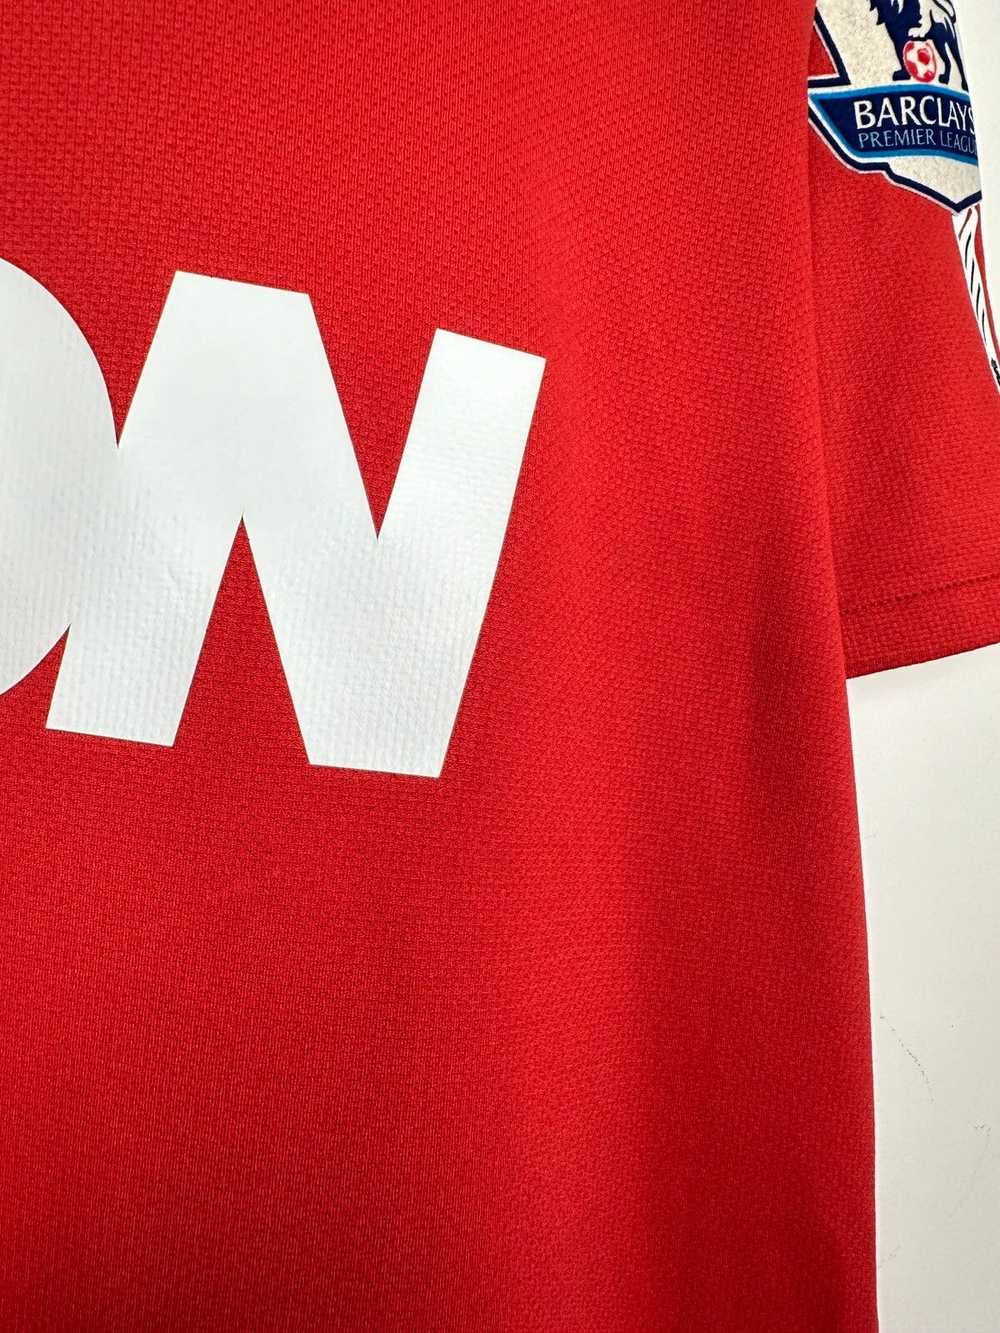 Jersey × Nike × Soccer Jersey #10 Rooney Manchest… - image 10